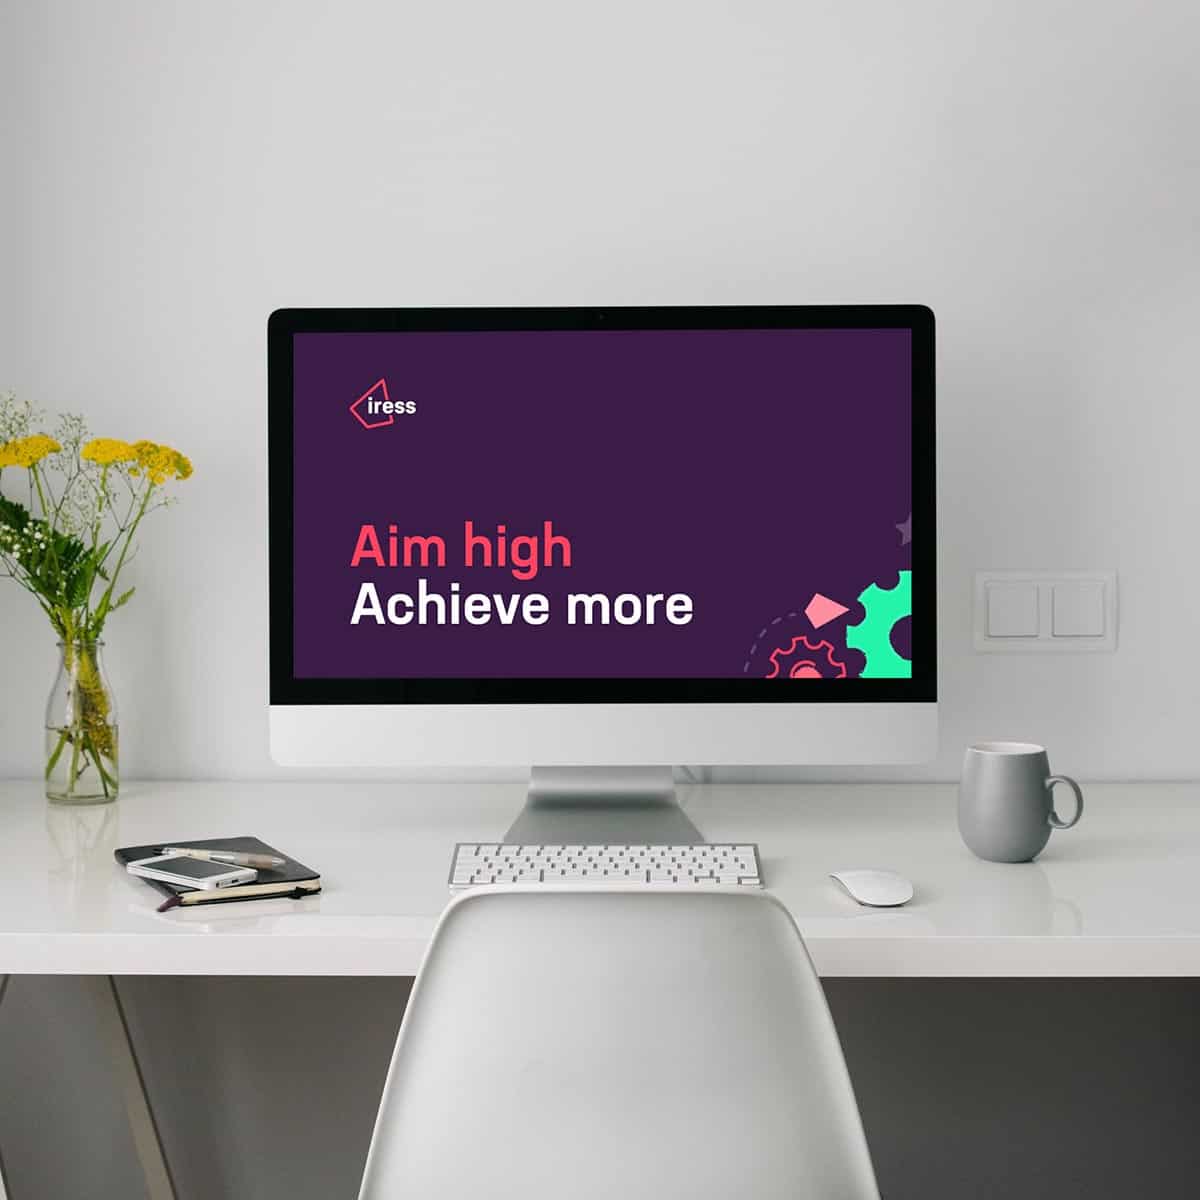 Computer workstation with Iress logo and slogan "Aim high, Achieve more"